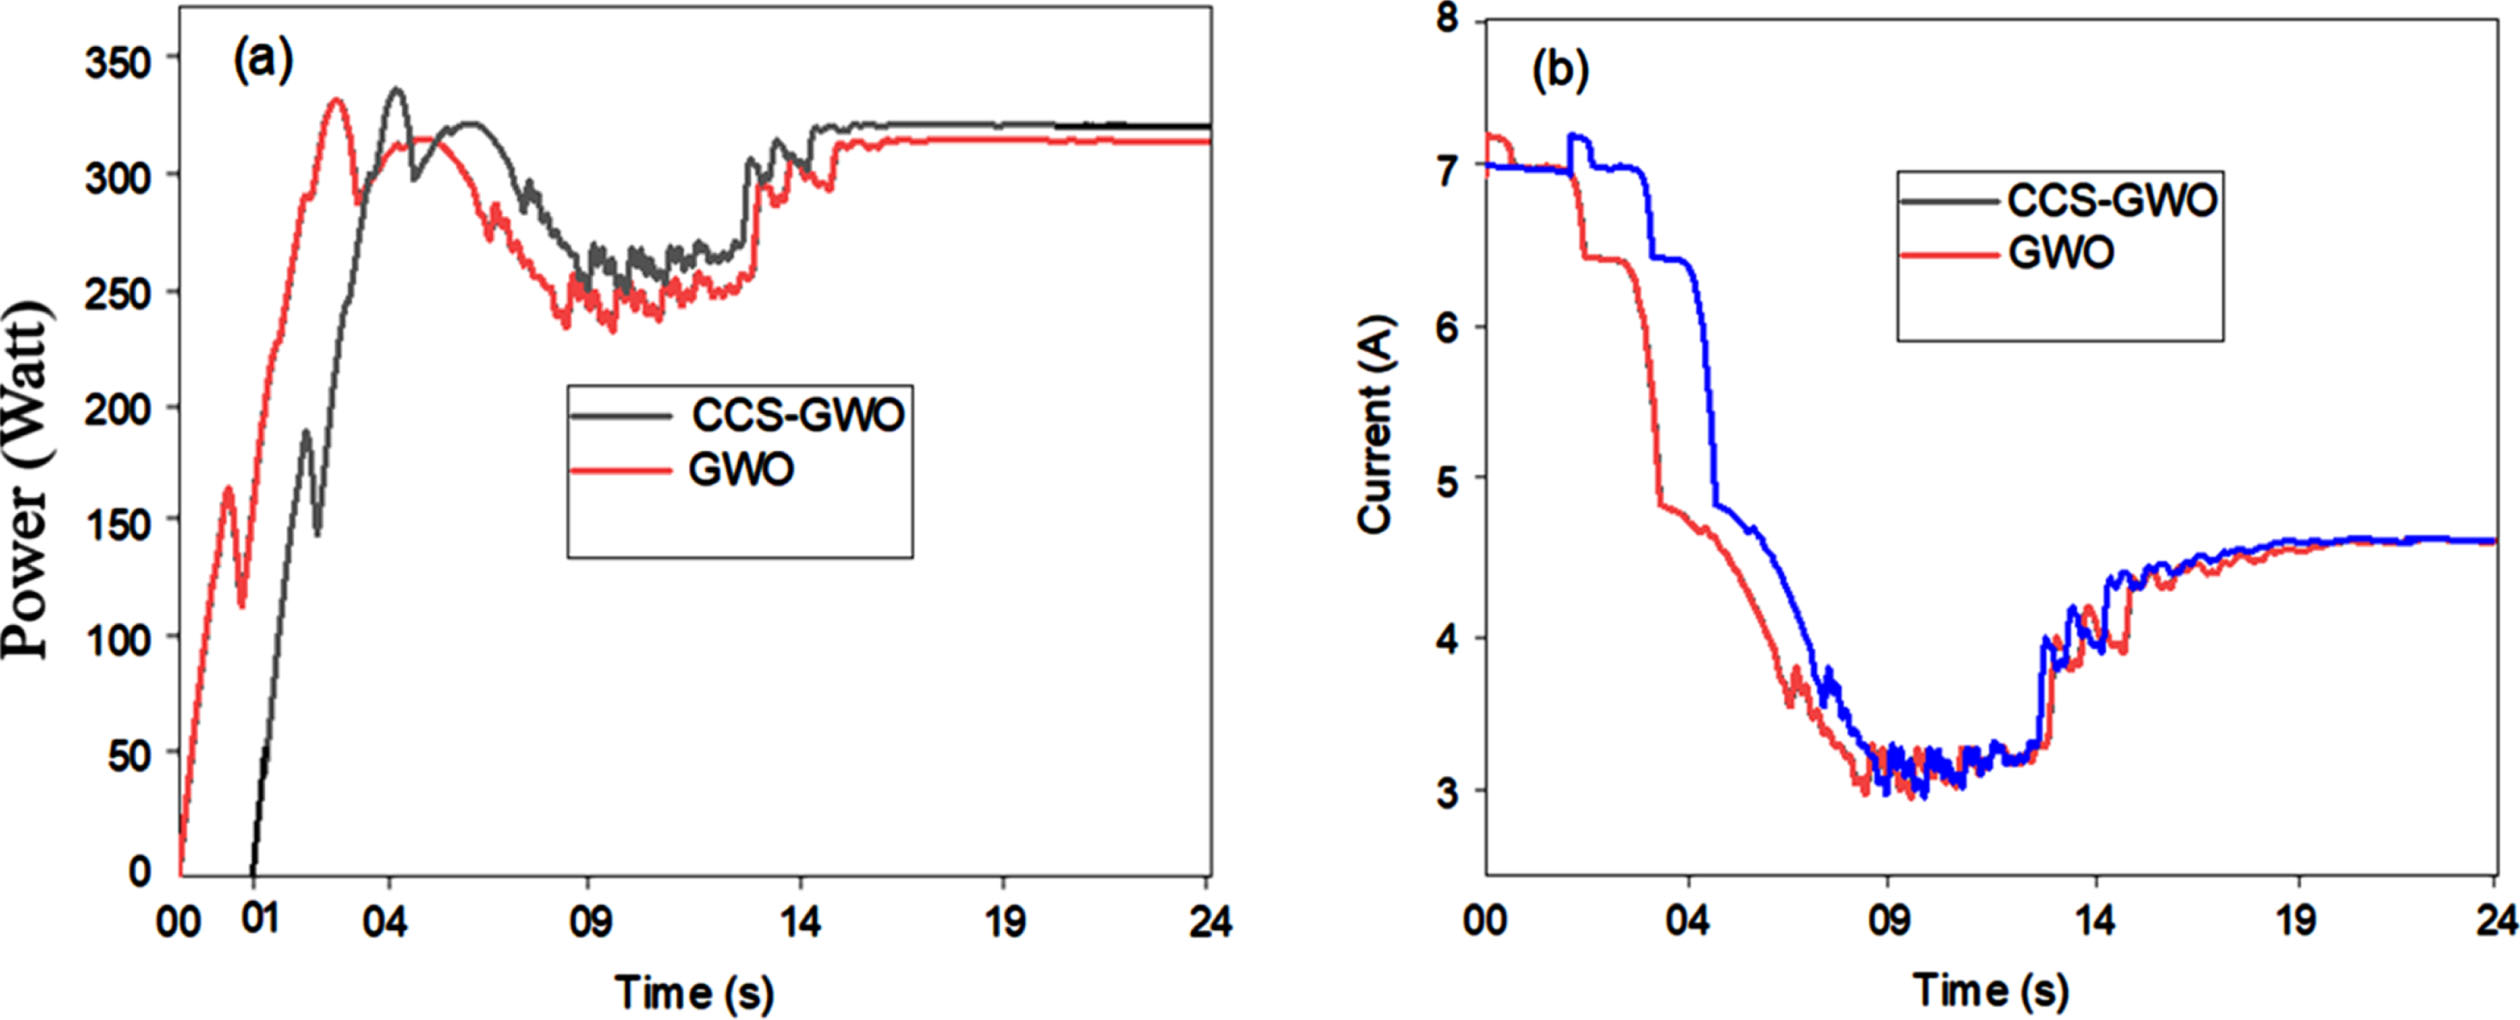 The CCS-GWO and GWO power curves (a) and the CCS-GWO and GWO current curves (b) under complex partial shading conditions (CPSCs).